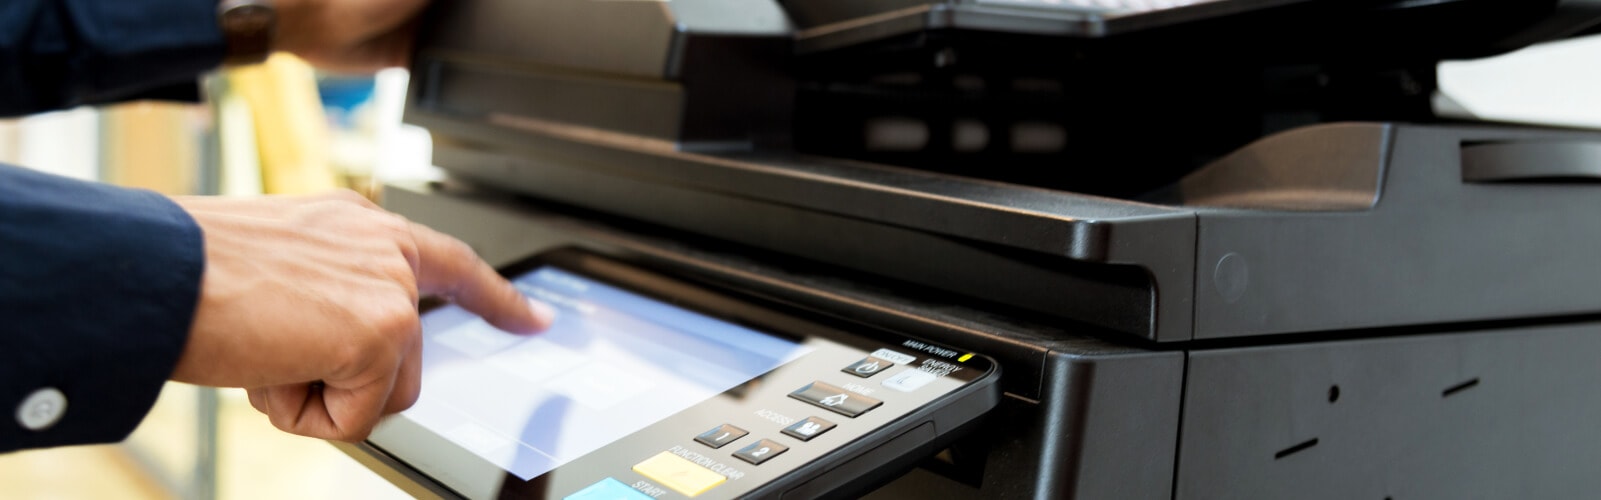 Business Printing Solutions